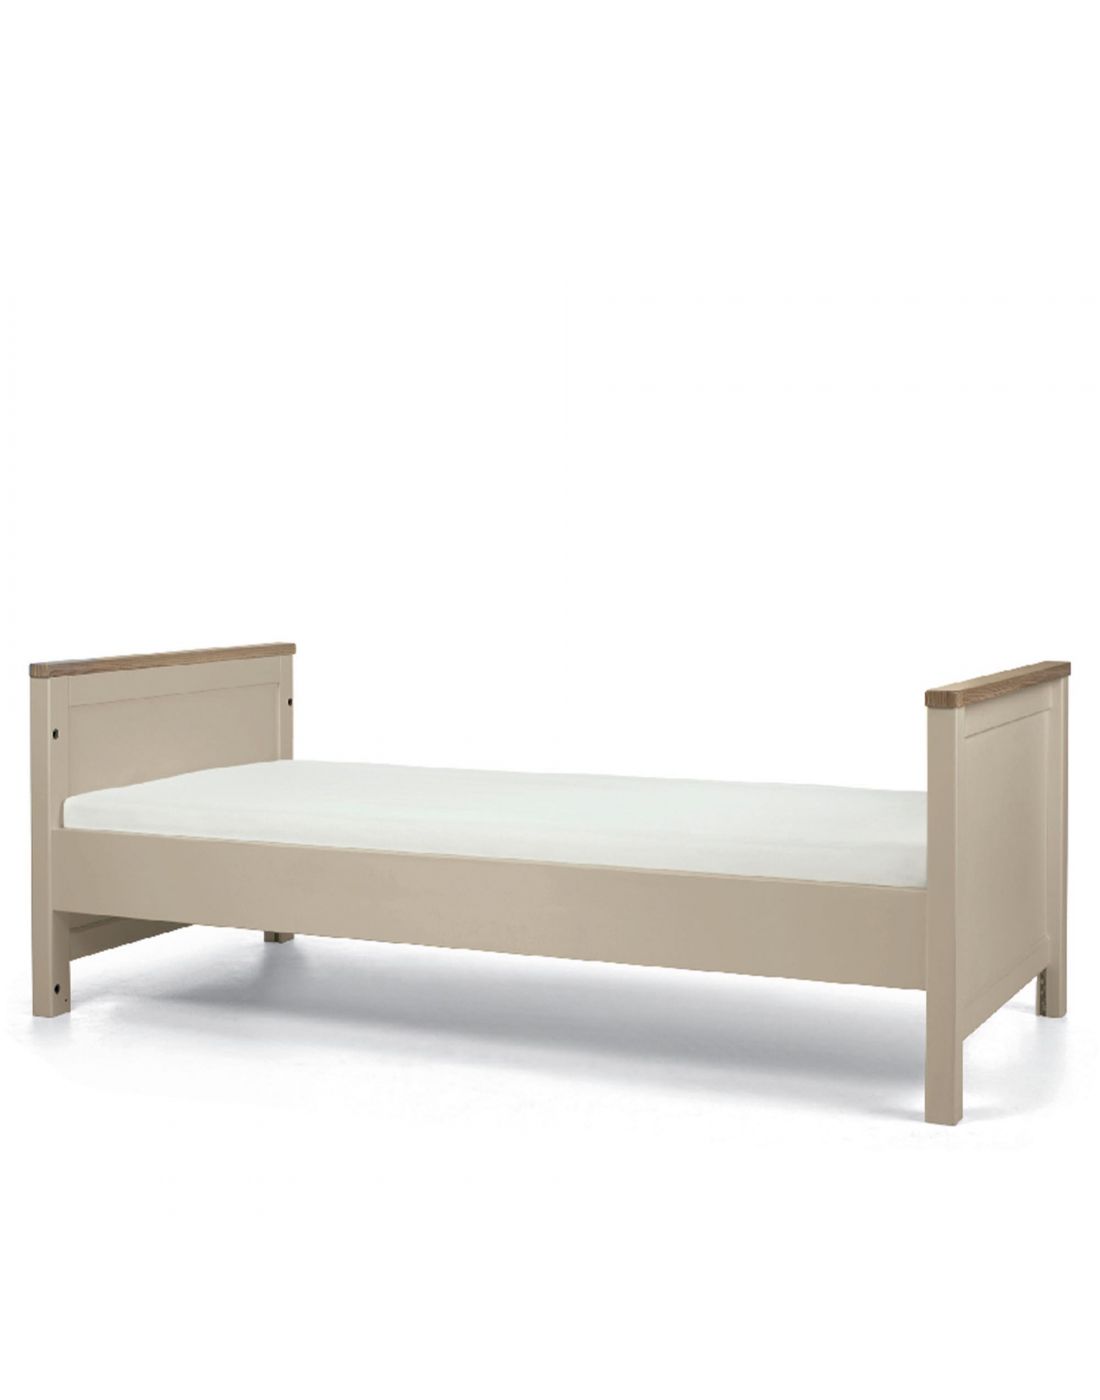 Mamas & Papas  Harwell Cot Bed Cashmere